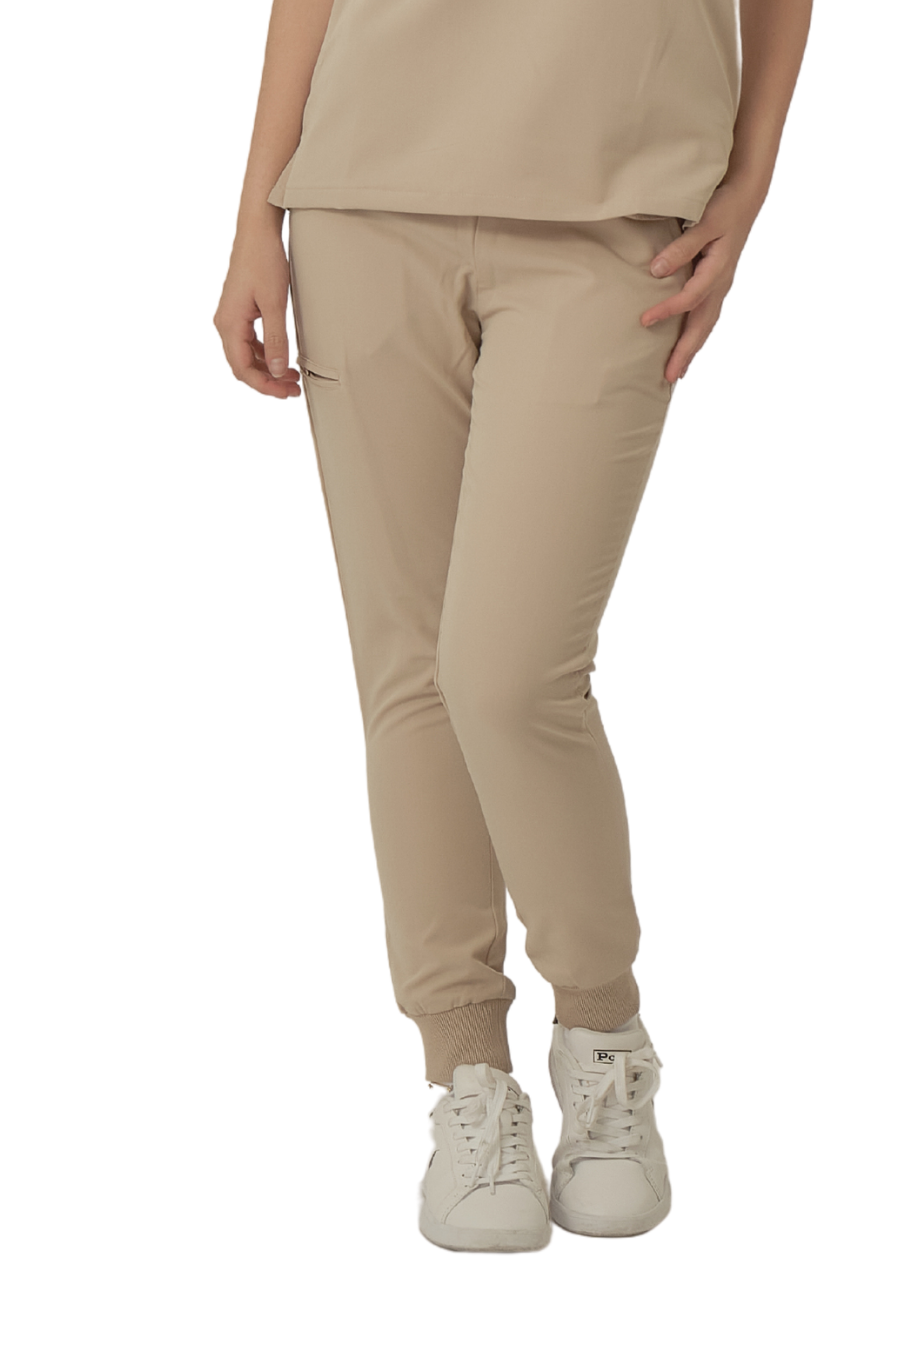 our BOWIE 5-pocket jogger womens scrub pants in light khaki